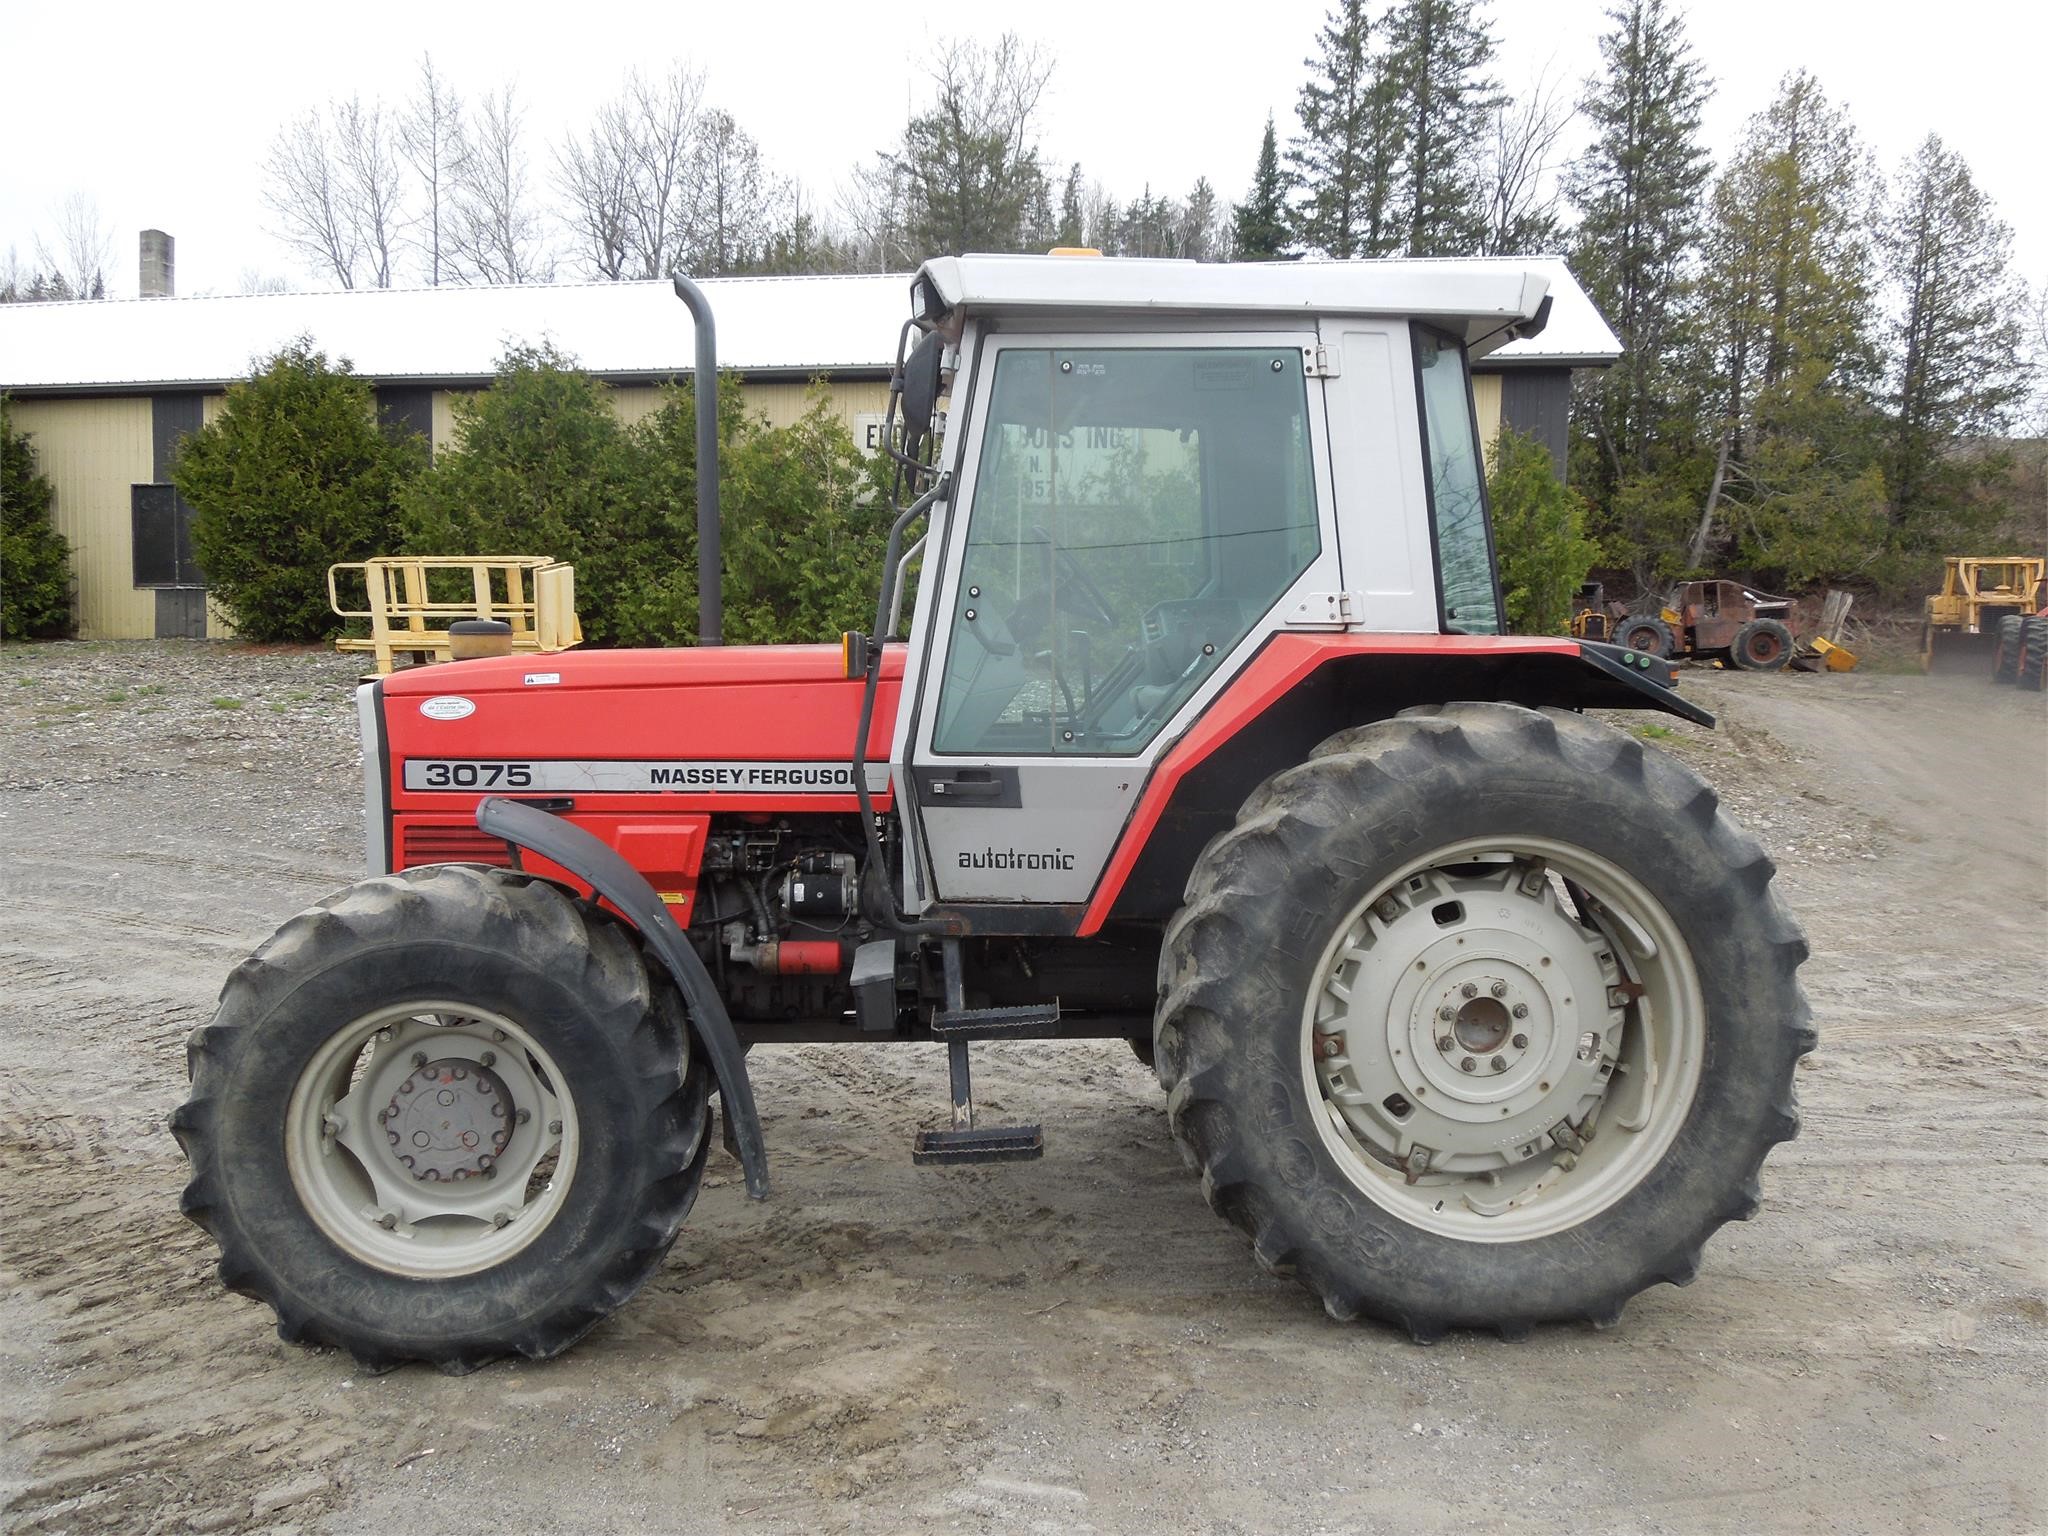 1994-massey-ferguson-3075-for-sale-in-colebrook-new-hampshire-www